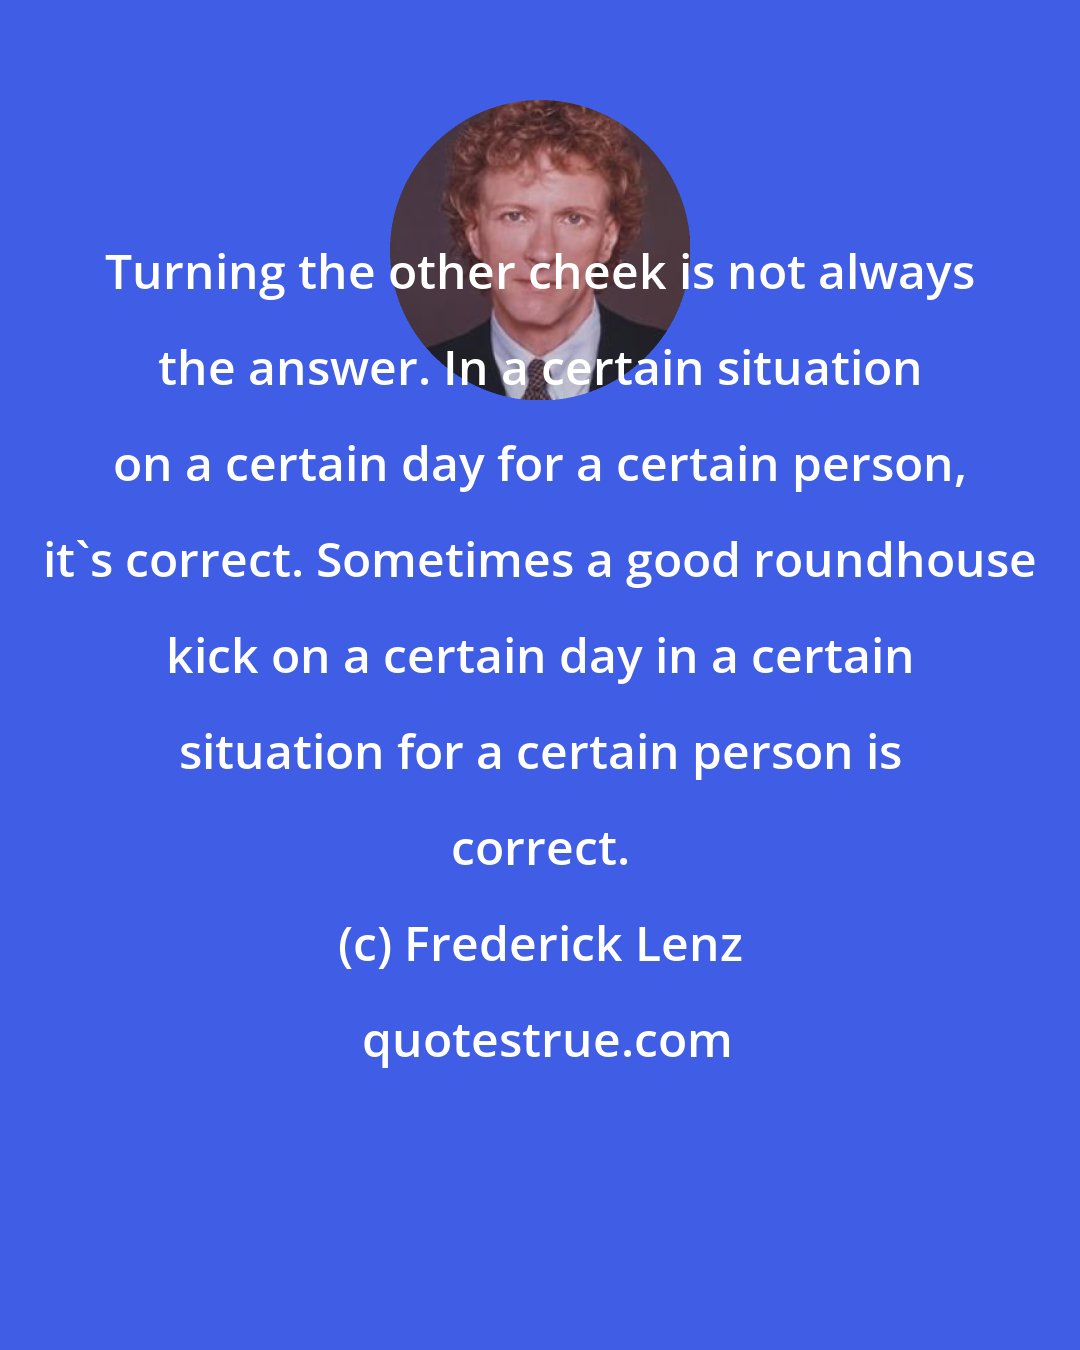 Frederick Lenz: Turning the other cheek is not always the answer. In a certain situation on a certain day for a certain person, it's correct. Sometimes a good roundhouse kick on a certain day in a certain situation for a certain person is correct.